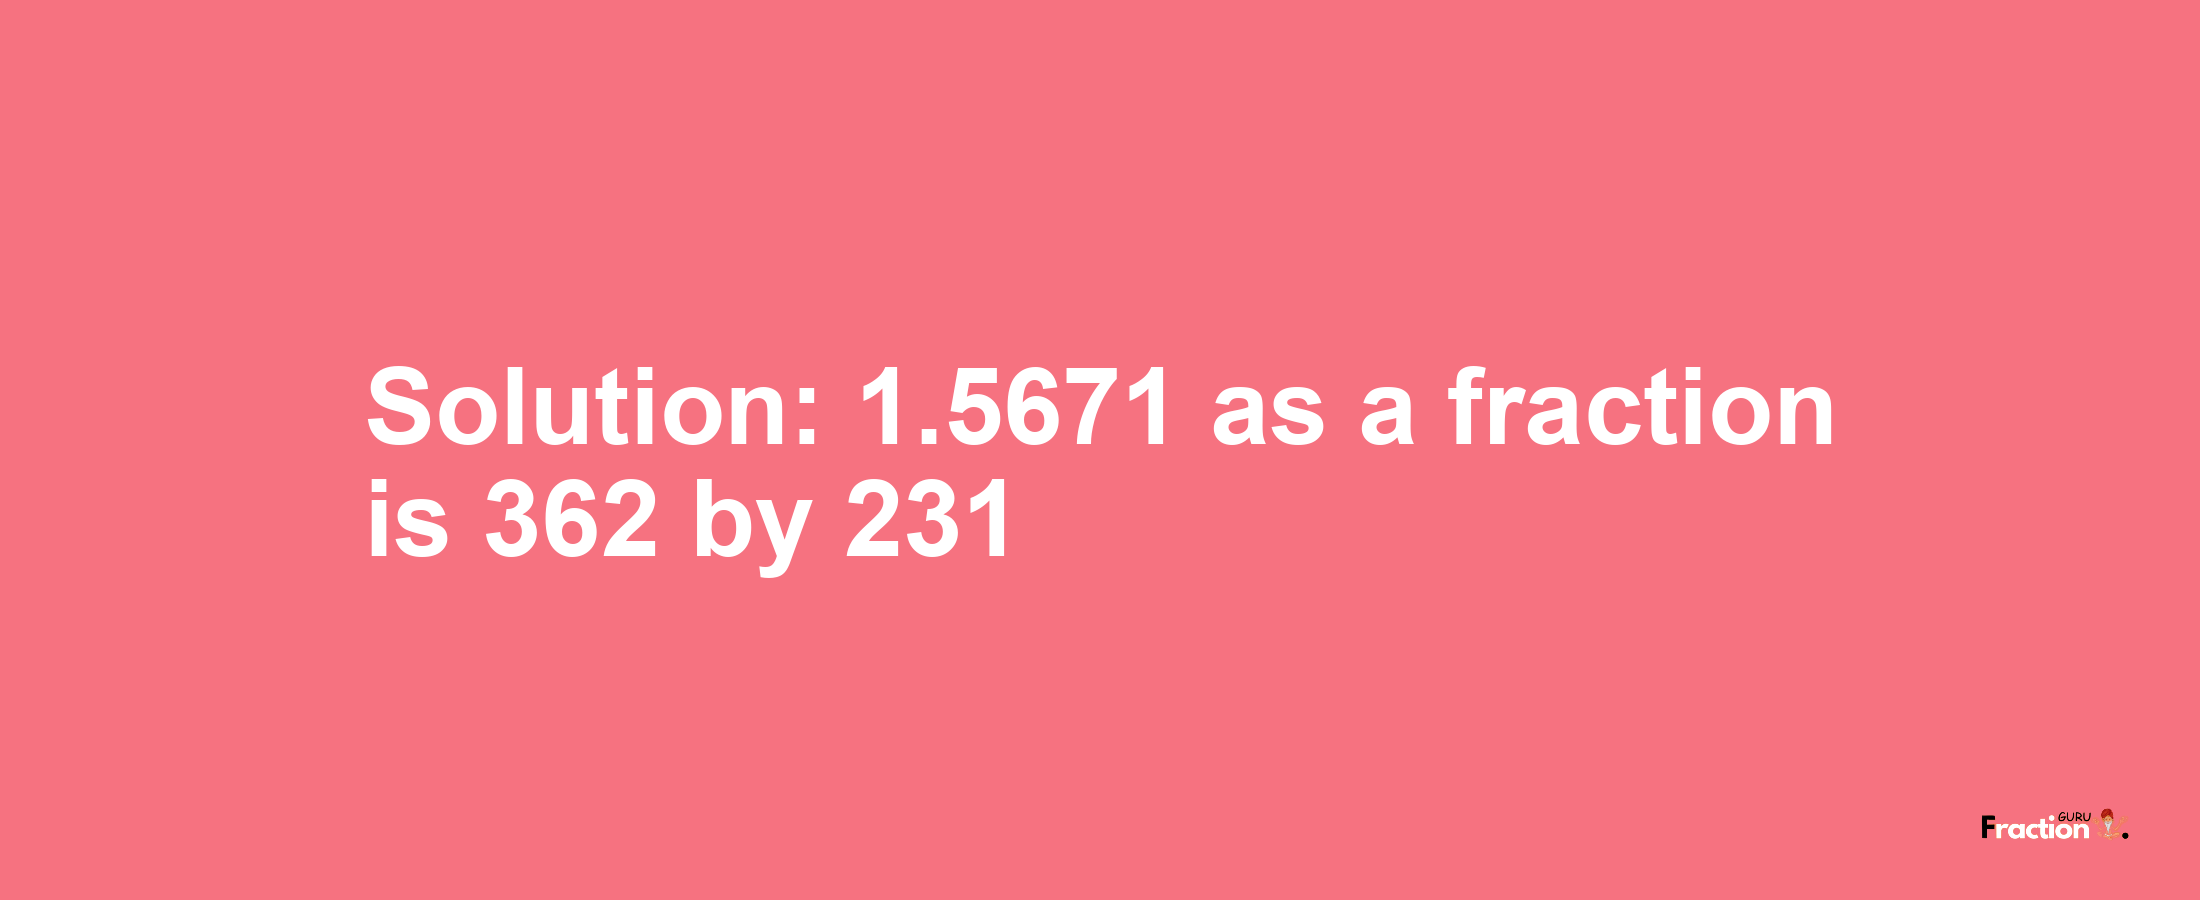 Solution:1.5671 as a fraction is 362/231